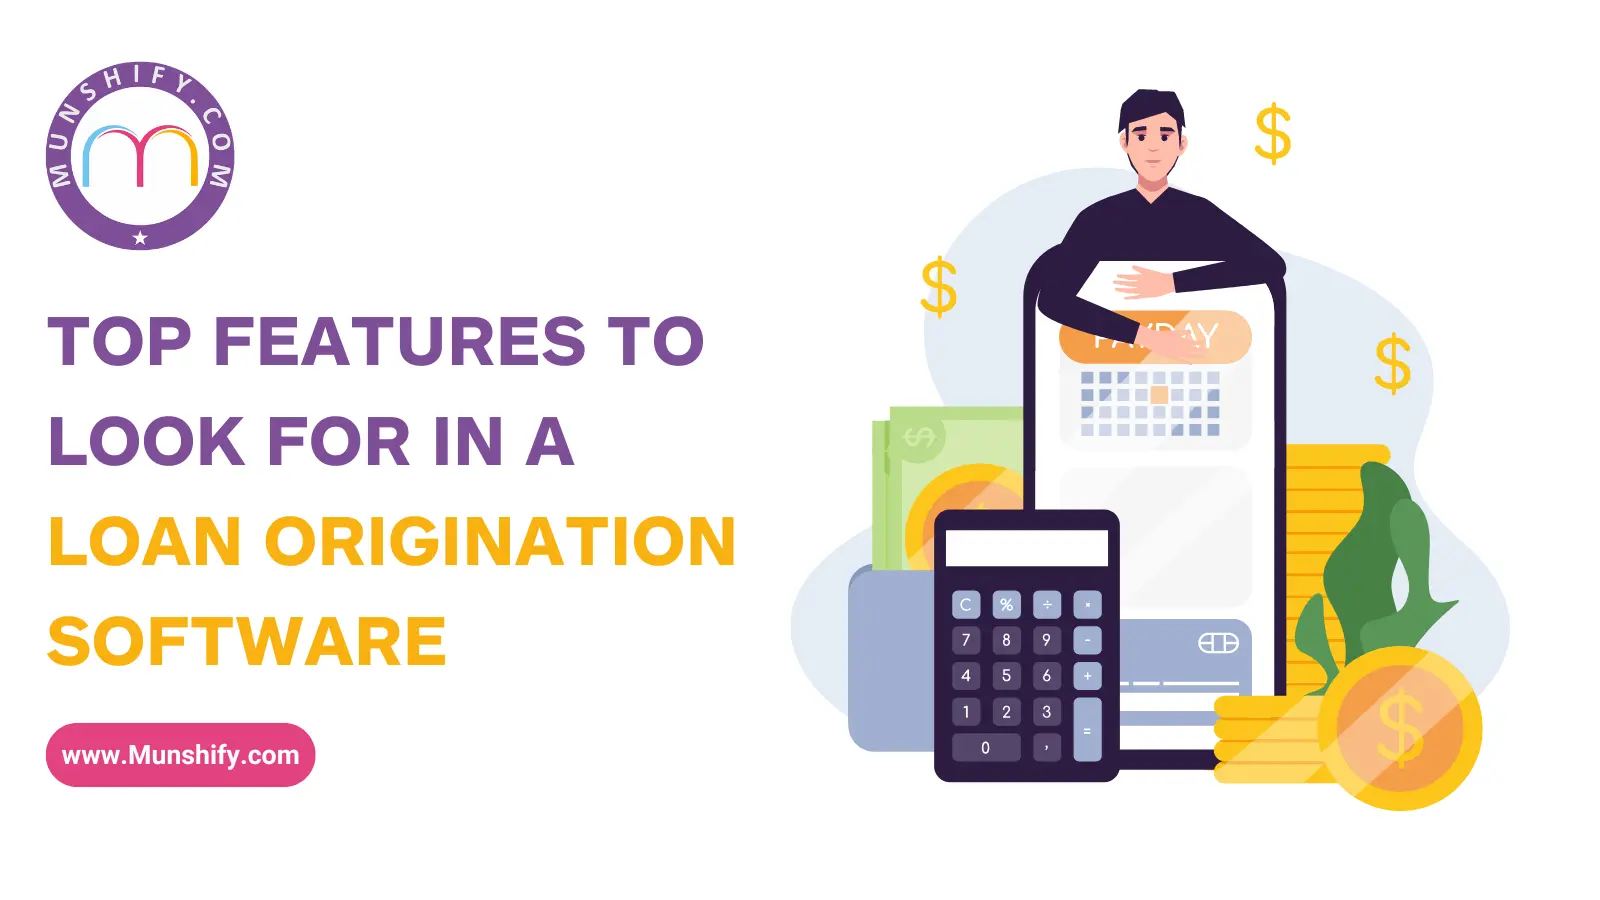 Top Features to Look for in a Loan Origination Software